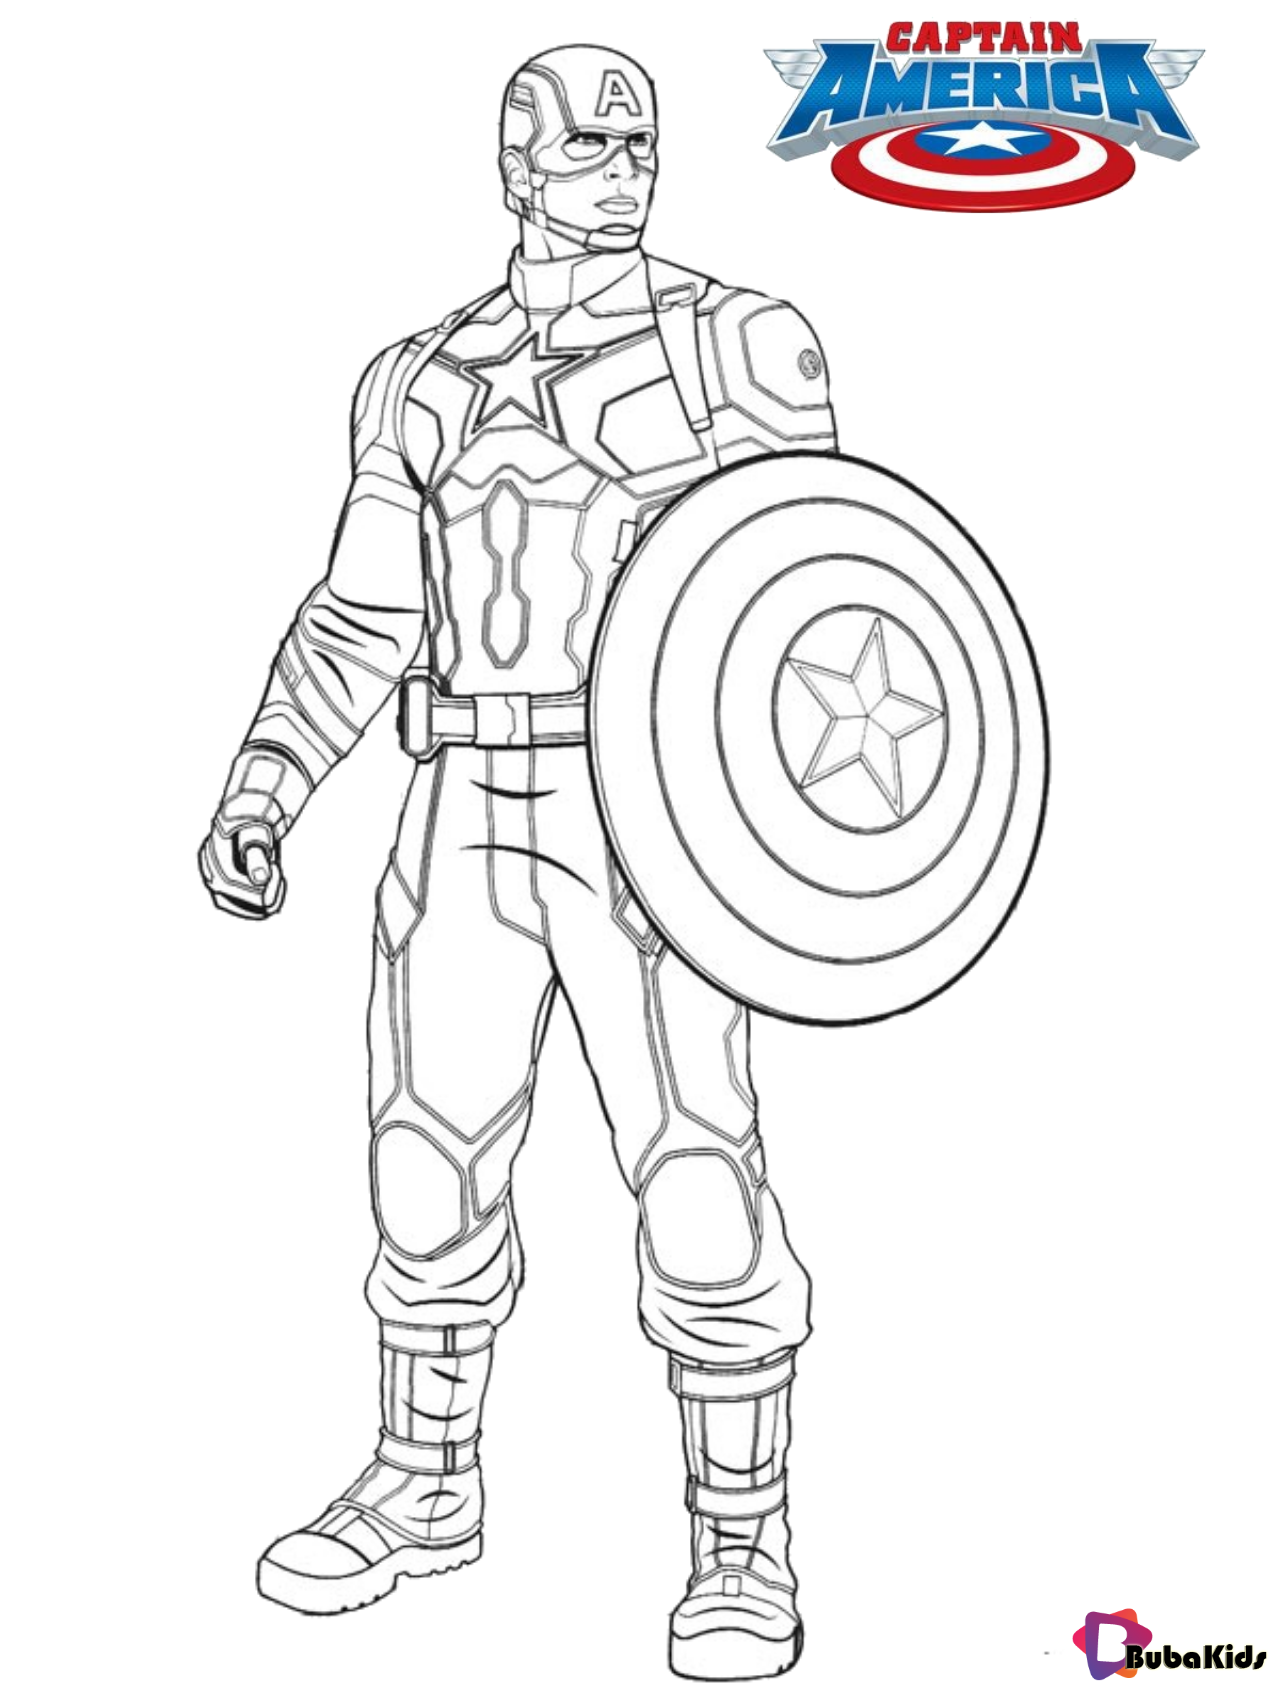 Captain america coloring page for kids Wallpaper